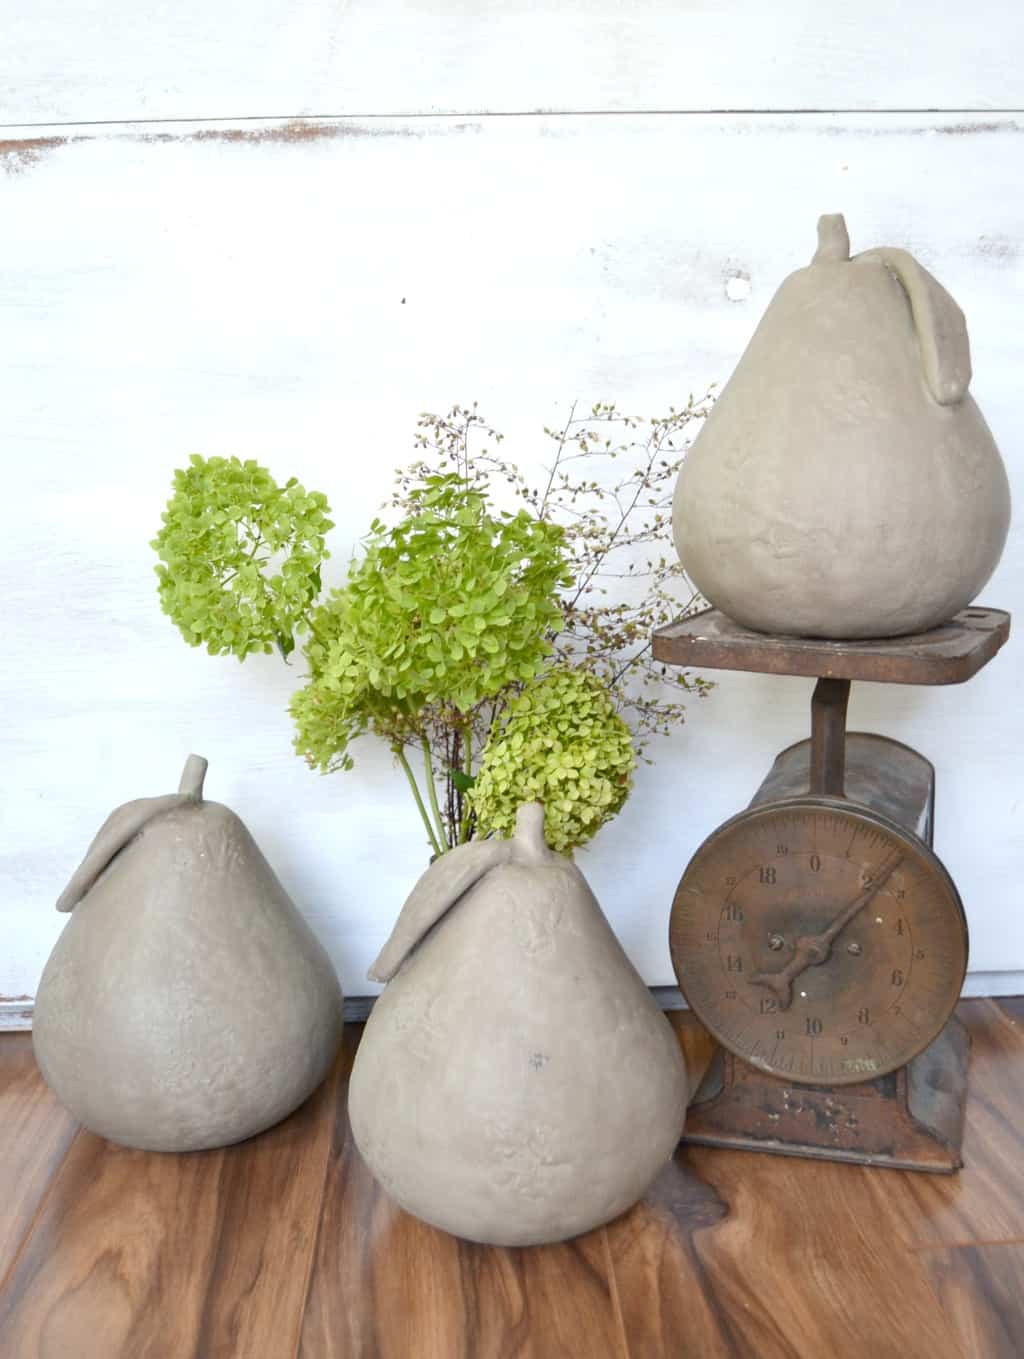 Autumn Crafts - Make These Modern Faux Concrete Pears For Your Home